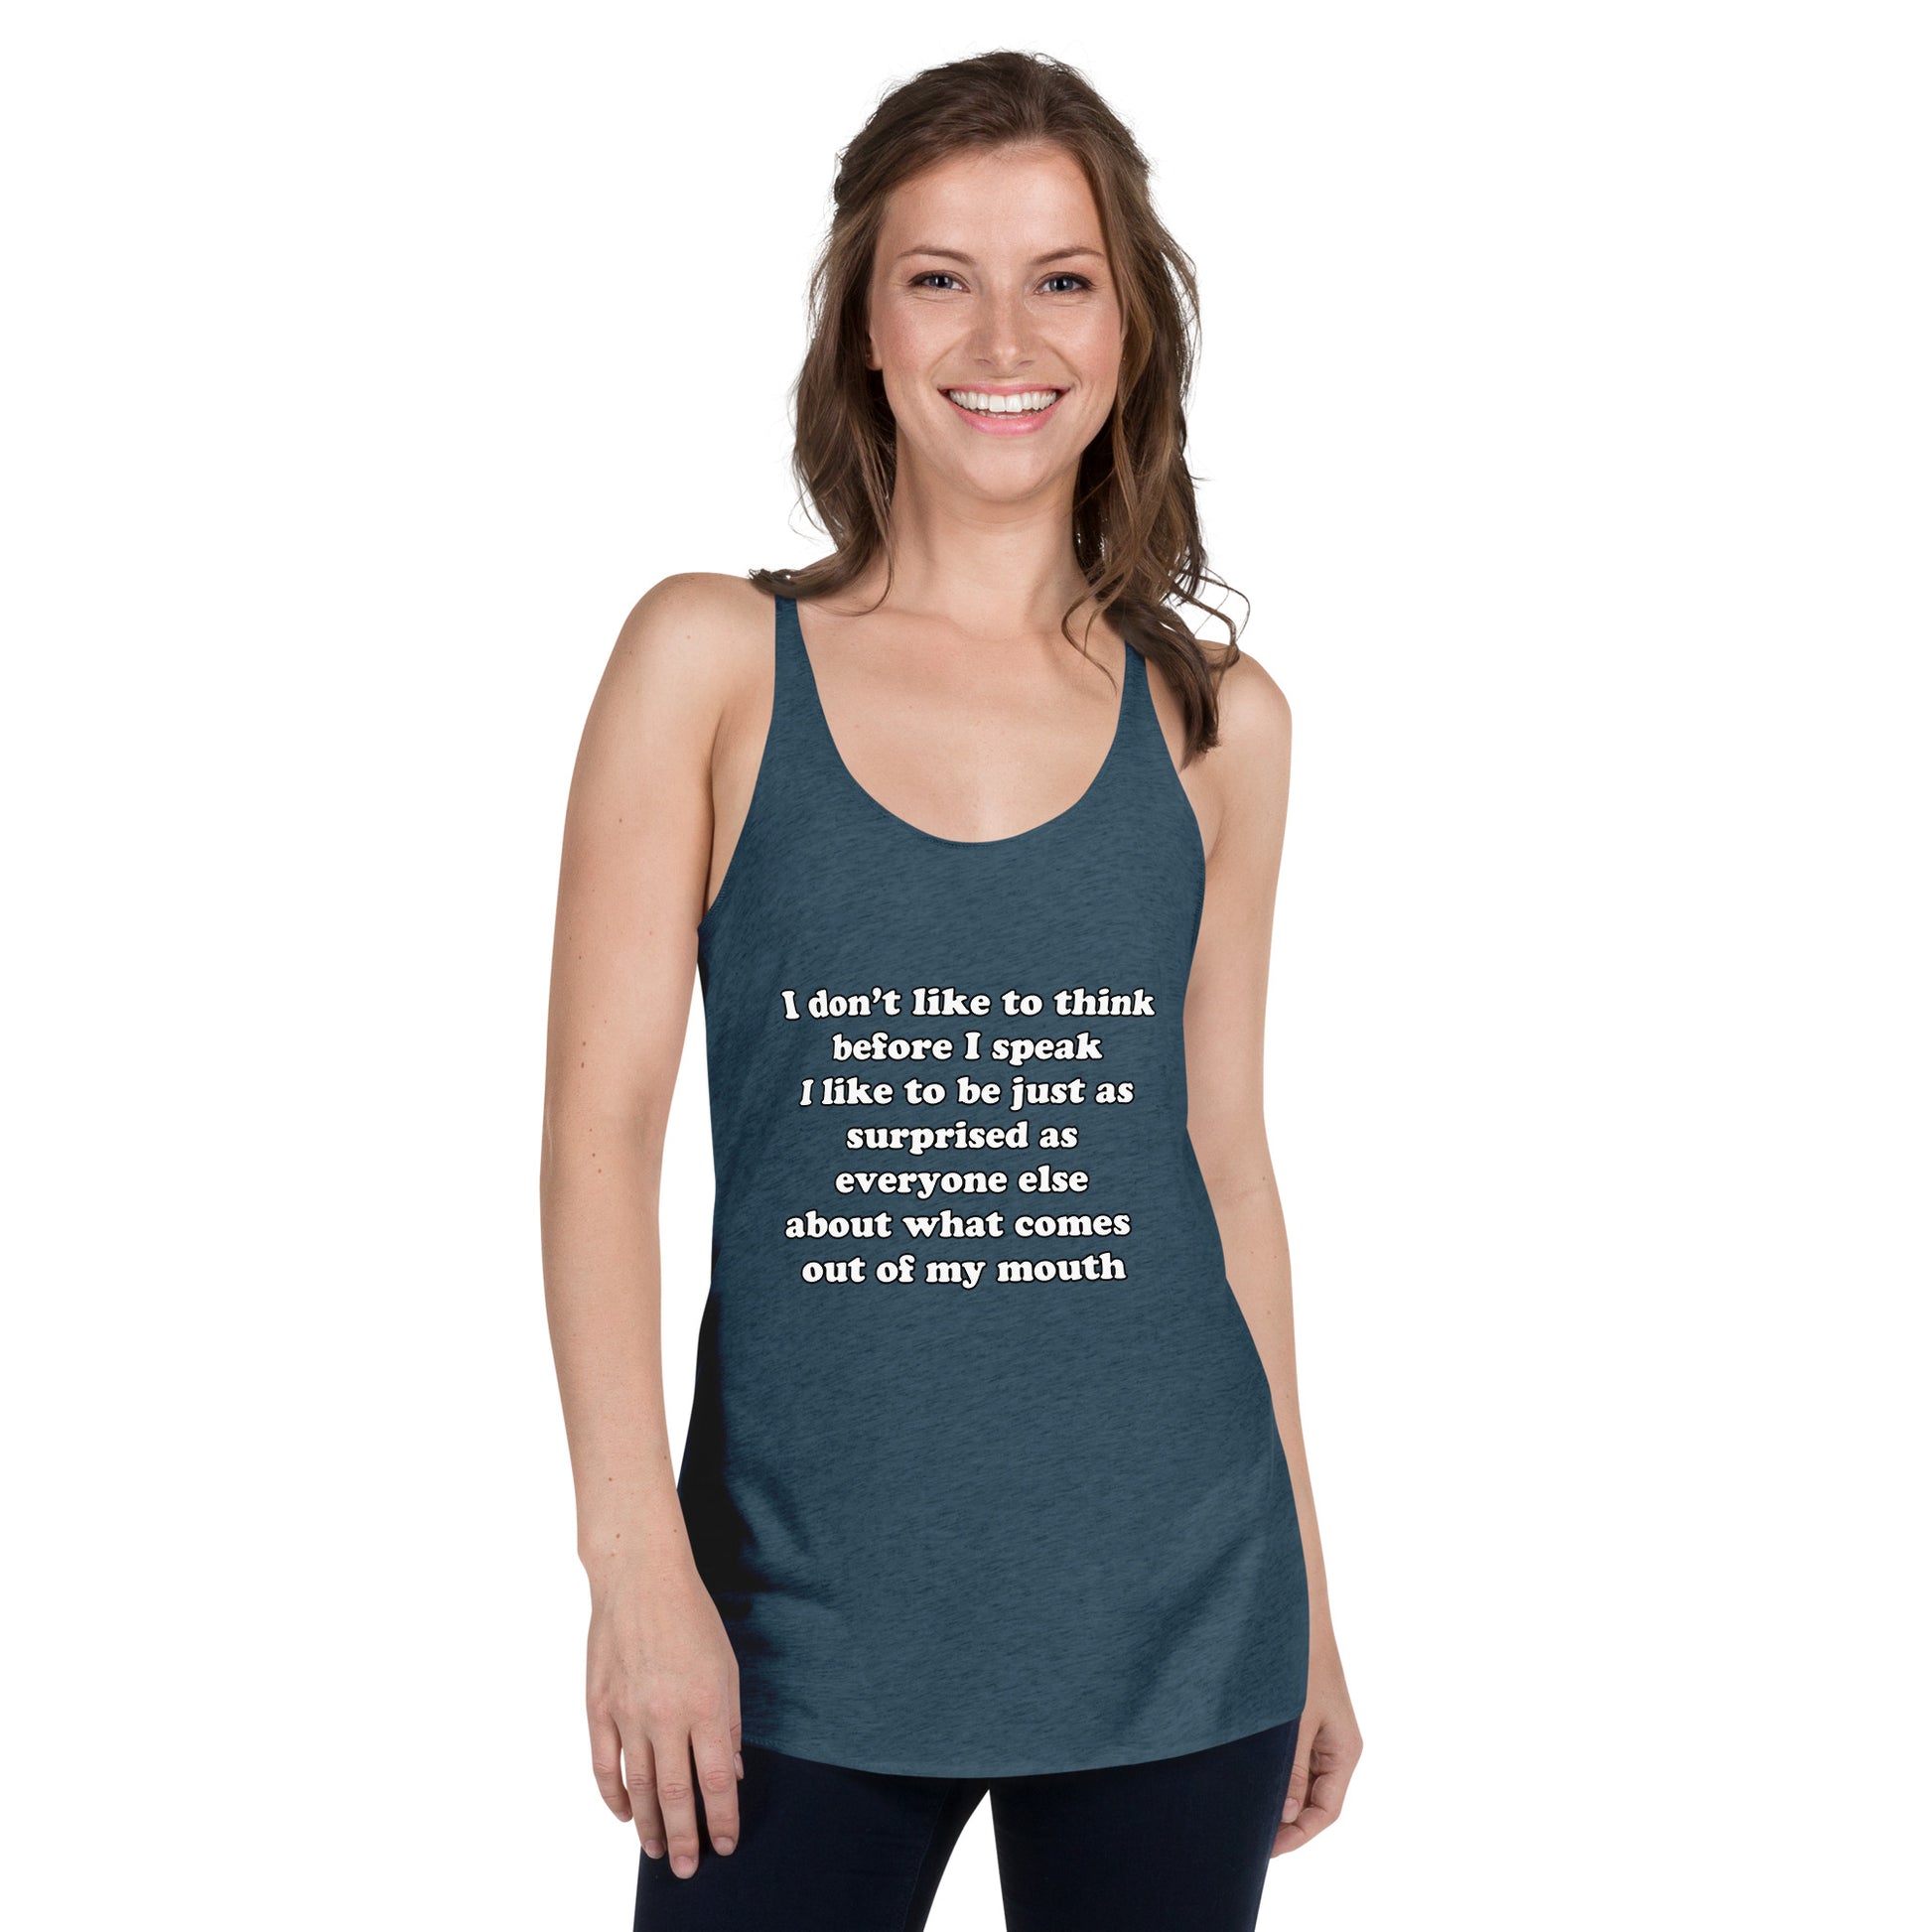 Woman with indigo blue tank top with text “I don't think before I speak Just as serprised as everyone about what comes out of my mouth"